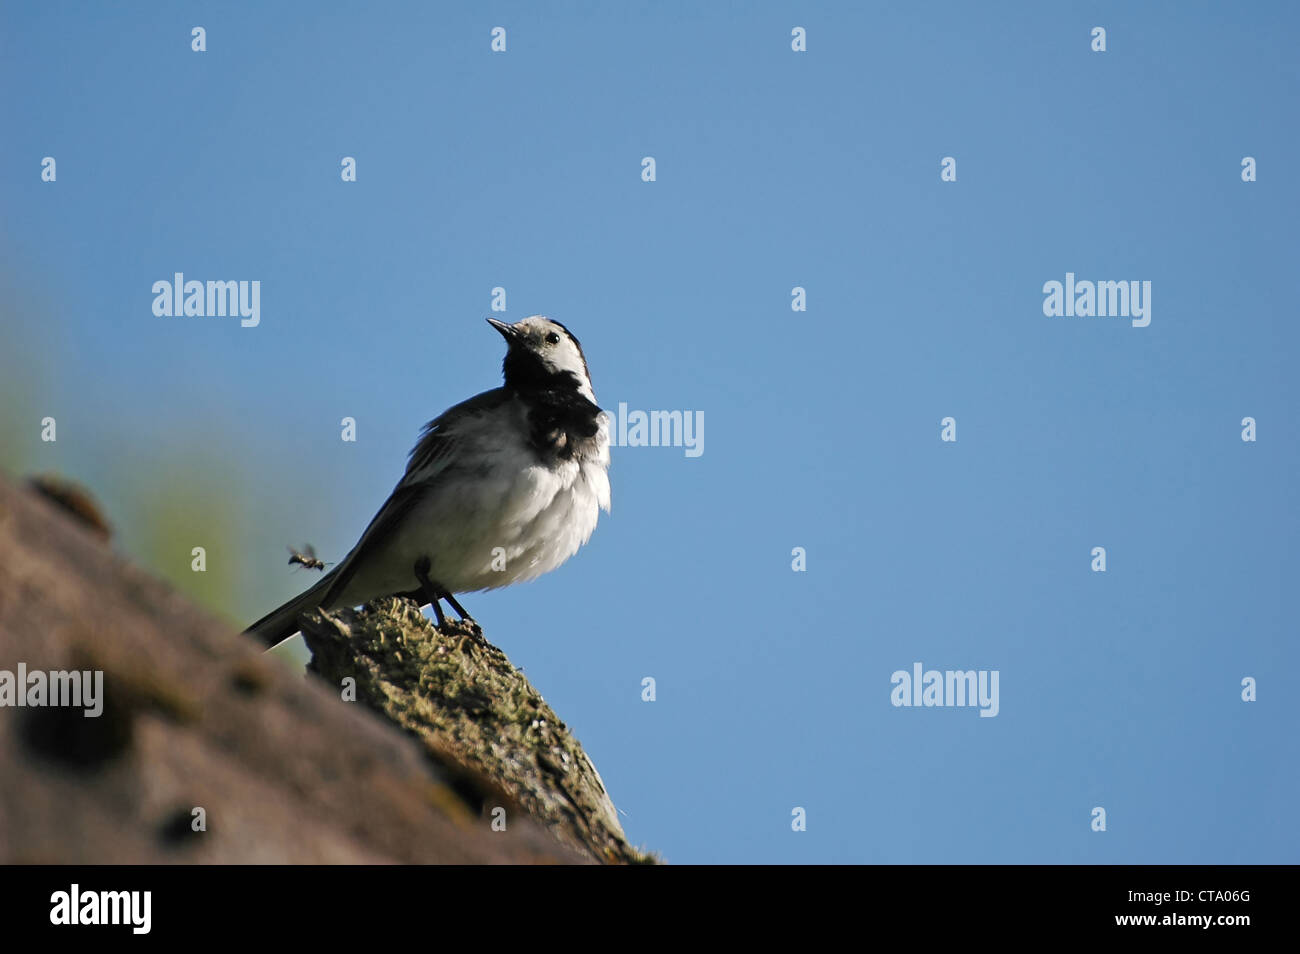 White Wagtail (Motacilla Alba) bird over blue sky background with flying insect Stock Photo